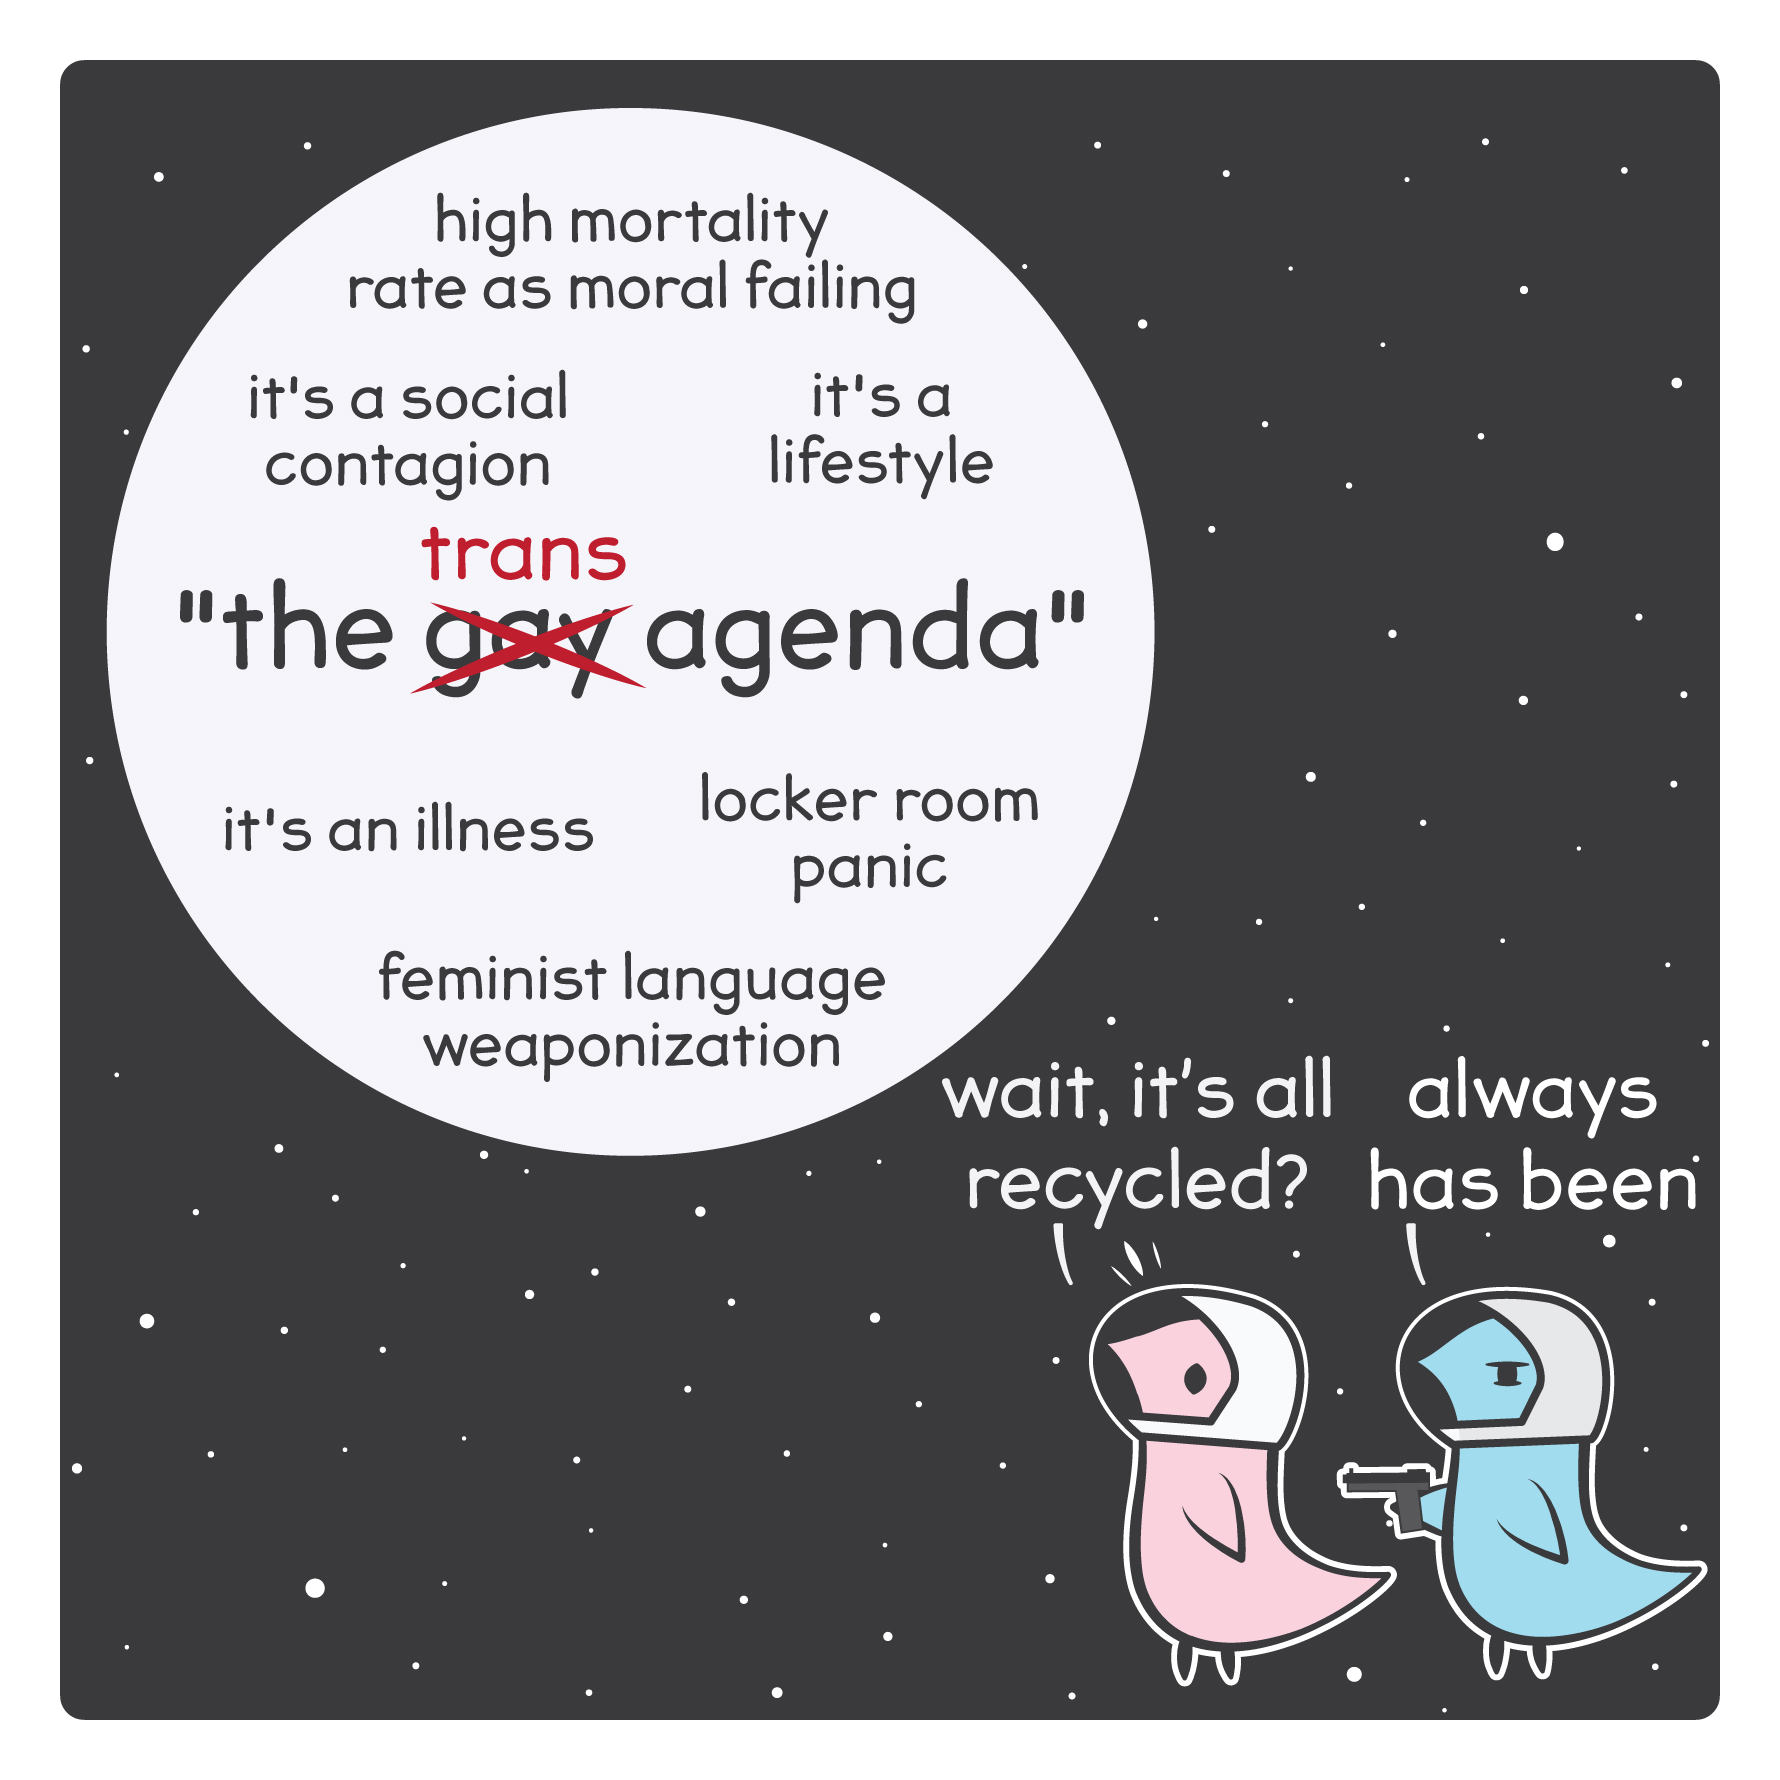 pinkwug comic: A pink astronaut is looking at a blob called "the gay agenda" with the gay crossed out in red and replaced with trans instead. The blob contains multiple phrases: high mortality rate as moral failing, it's a social contagion, it's a lifestyle, it's an illness, locker room panic, feminist language weaponization.

The pink astronaut says: "wait, it's all recycled?"

The blue astronaut behind them, pointing a gun at them, says: "always has been"